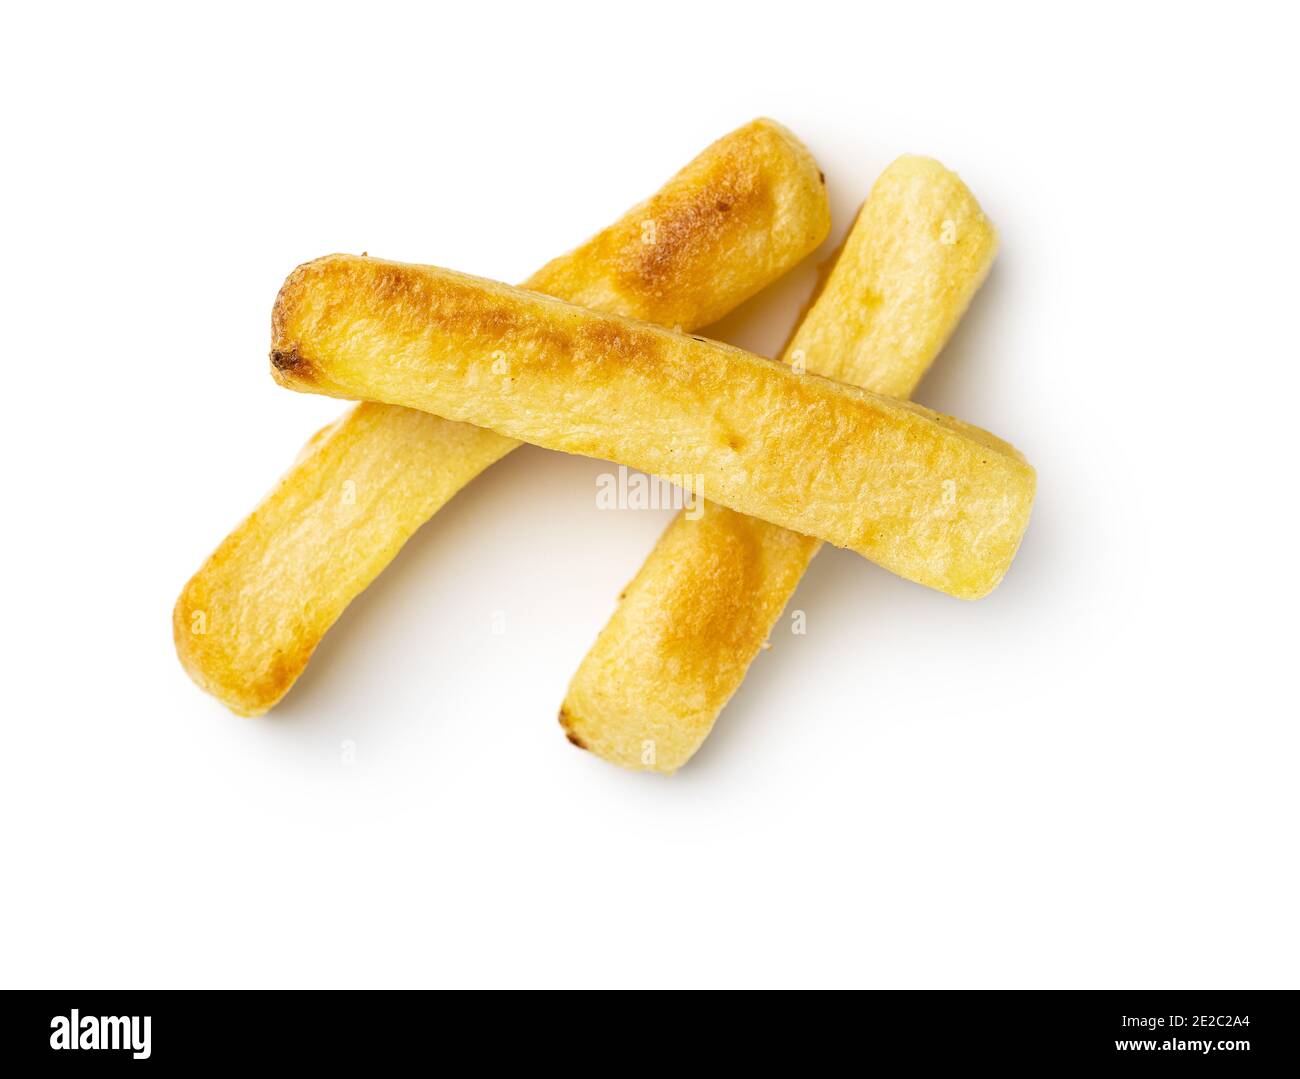 Big french fries. Fried potato chips isolated on white background. Stock Photo